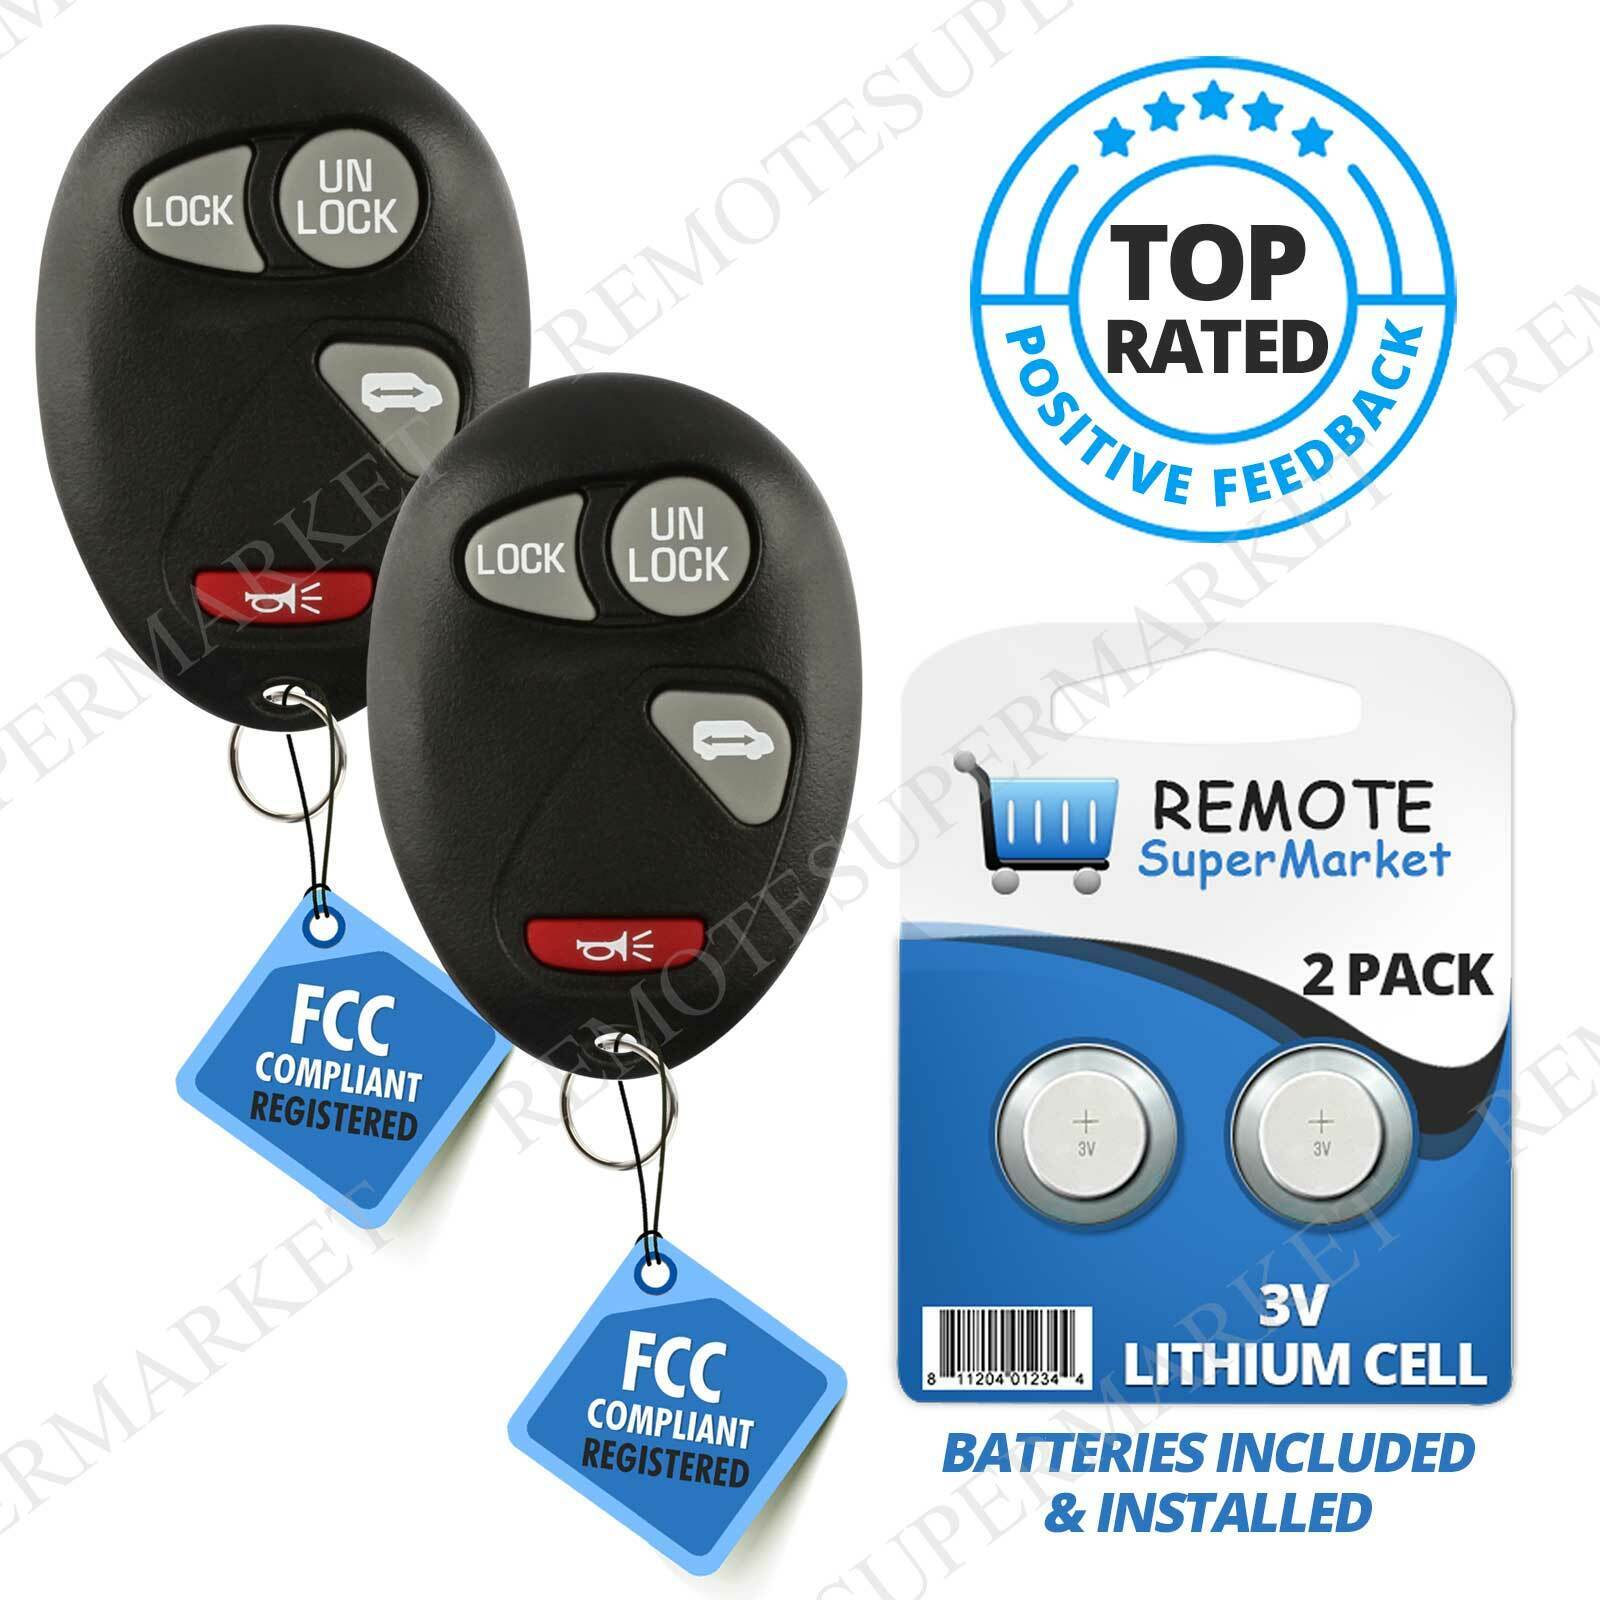 Replacement for 01-05 Chevy Venture Silhouette Montana Remote Car Key Fob Pair